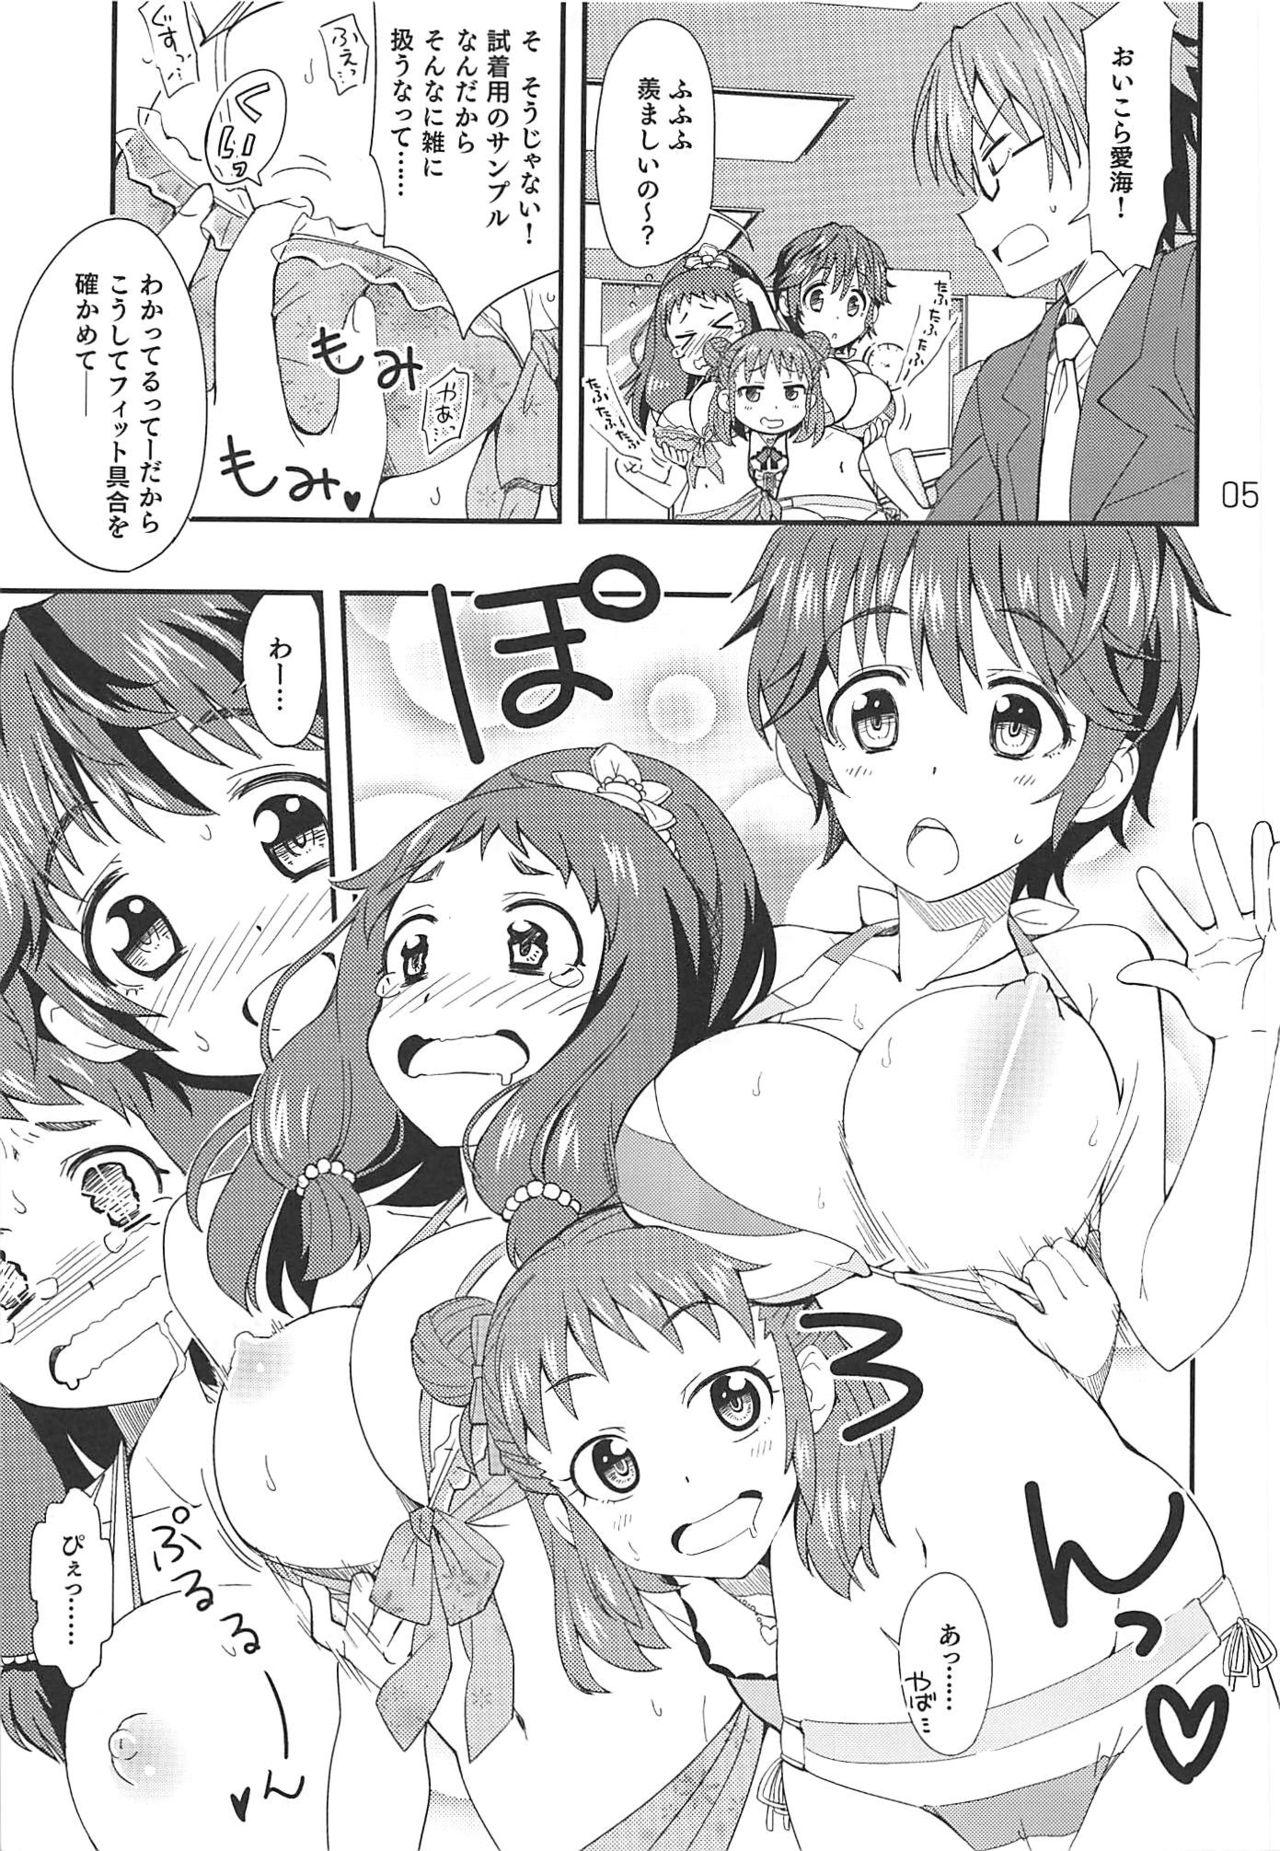 Submissive Wotometicm@ster - The idolmaster Sola - Page 4